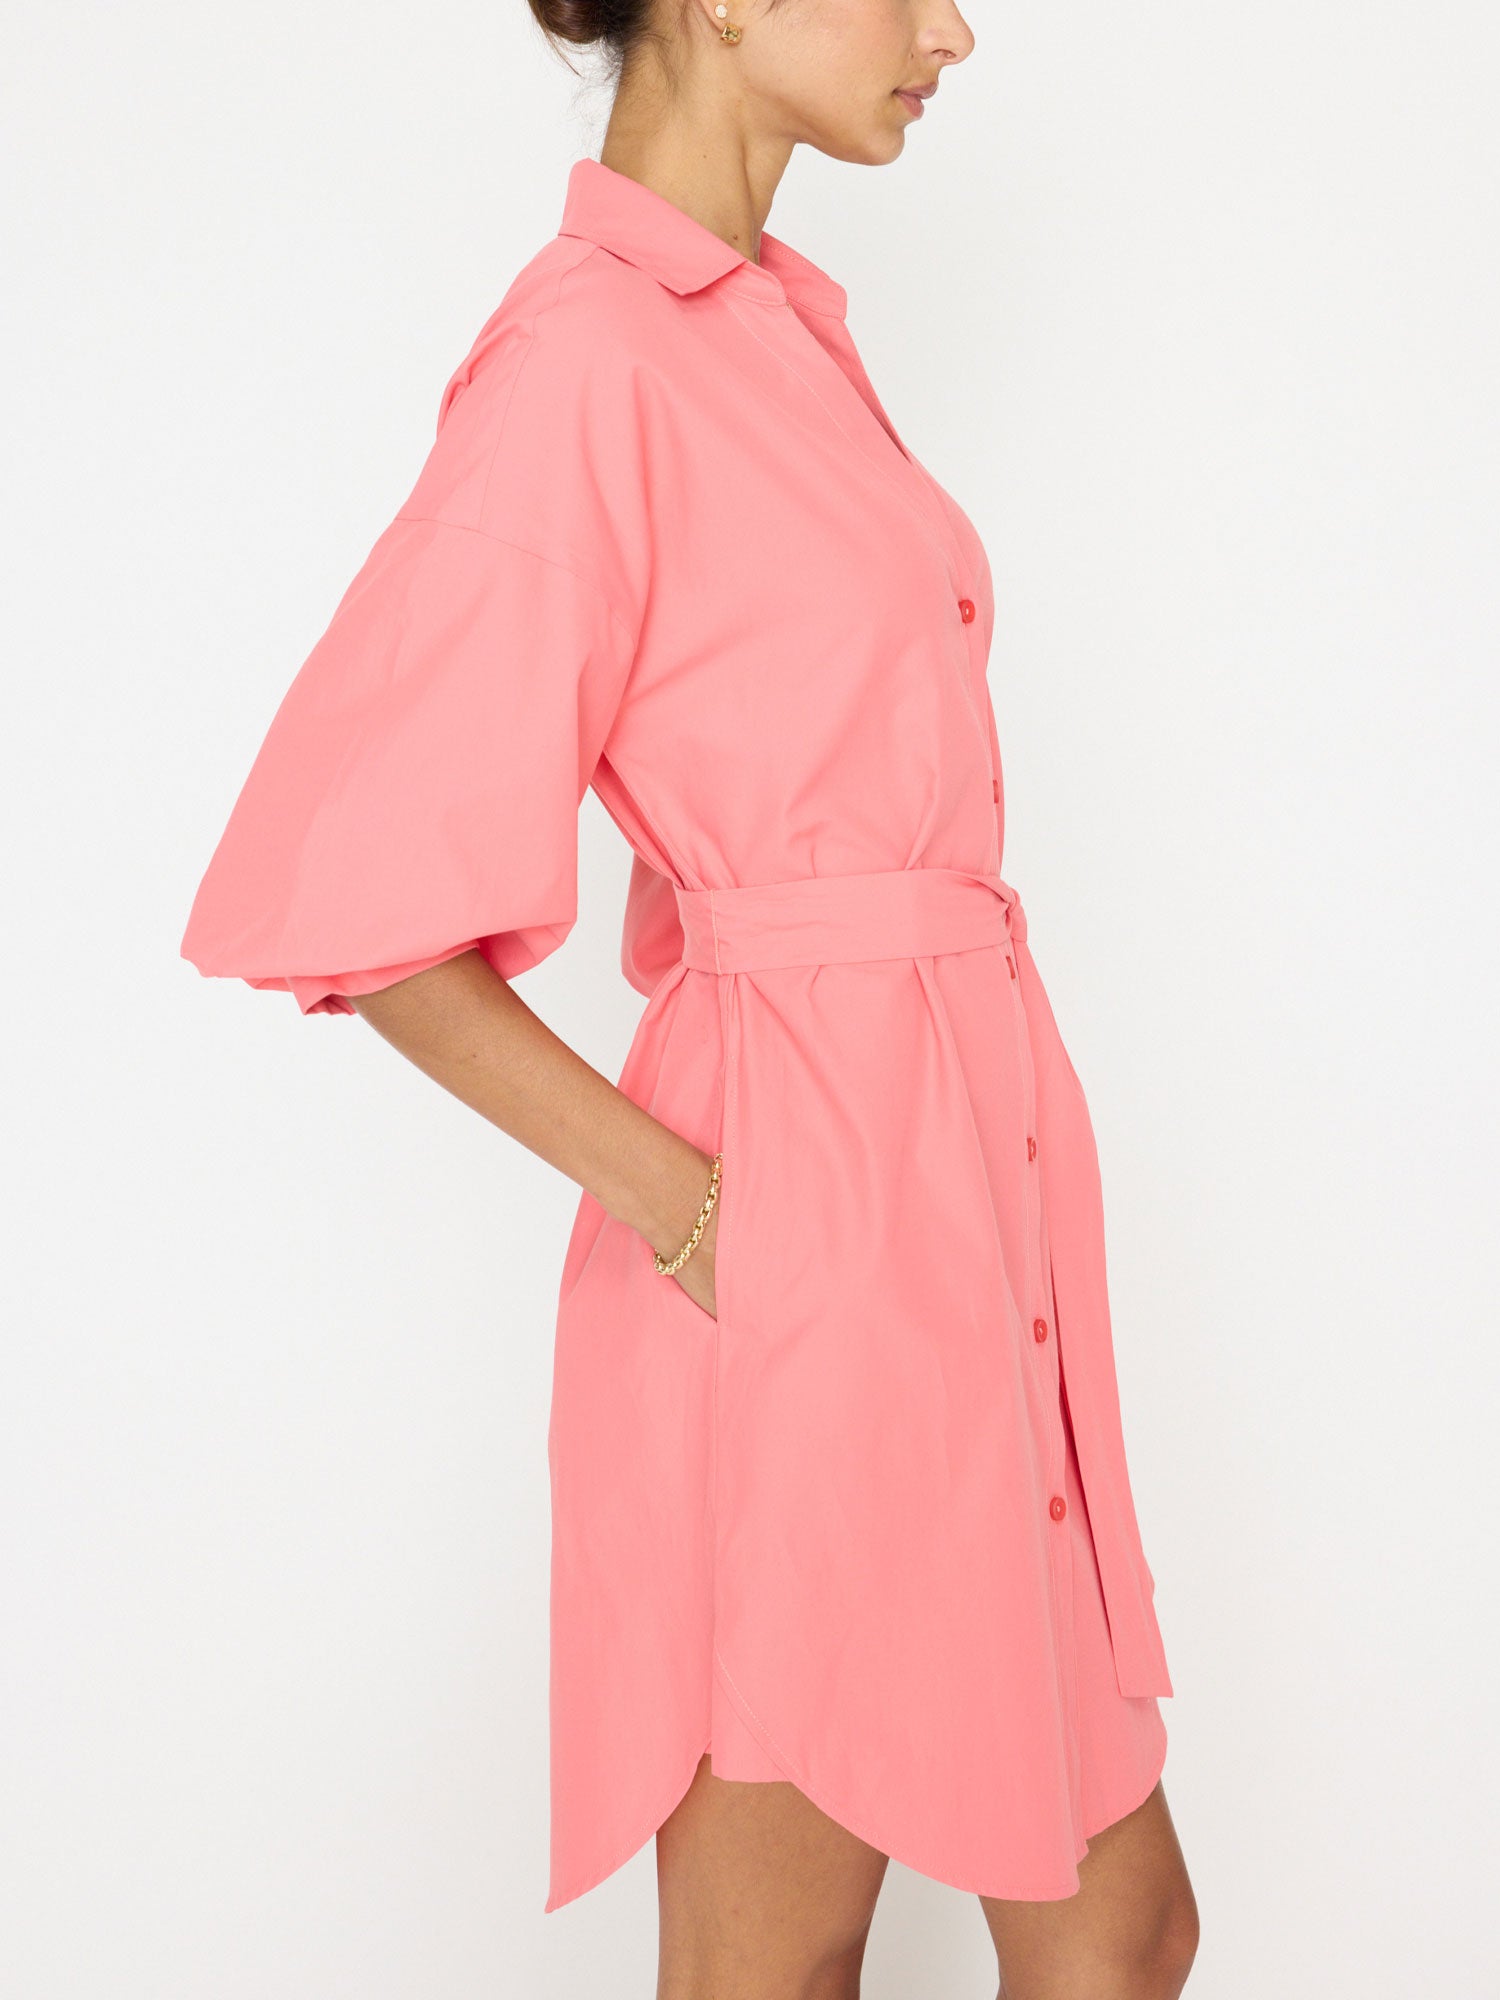 Kate belted button up mini shirtdress pink side view 3